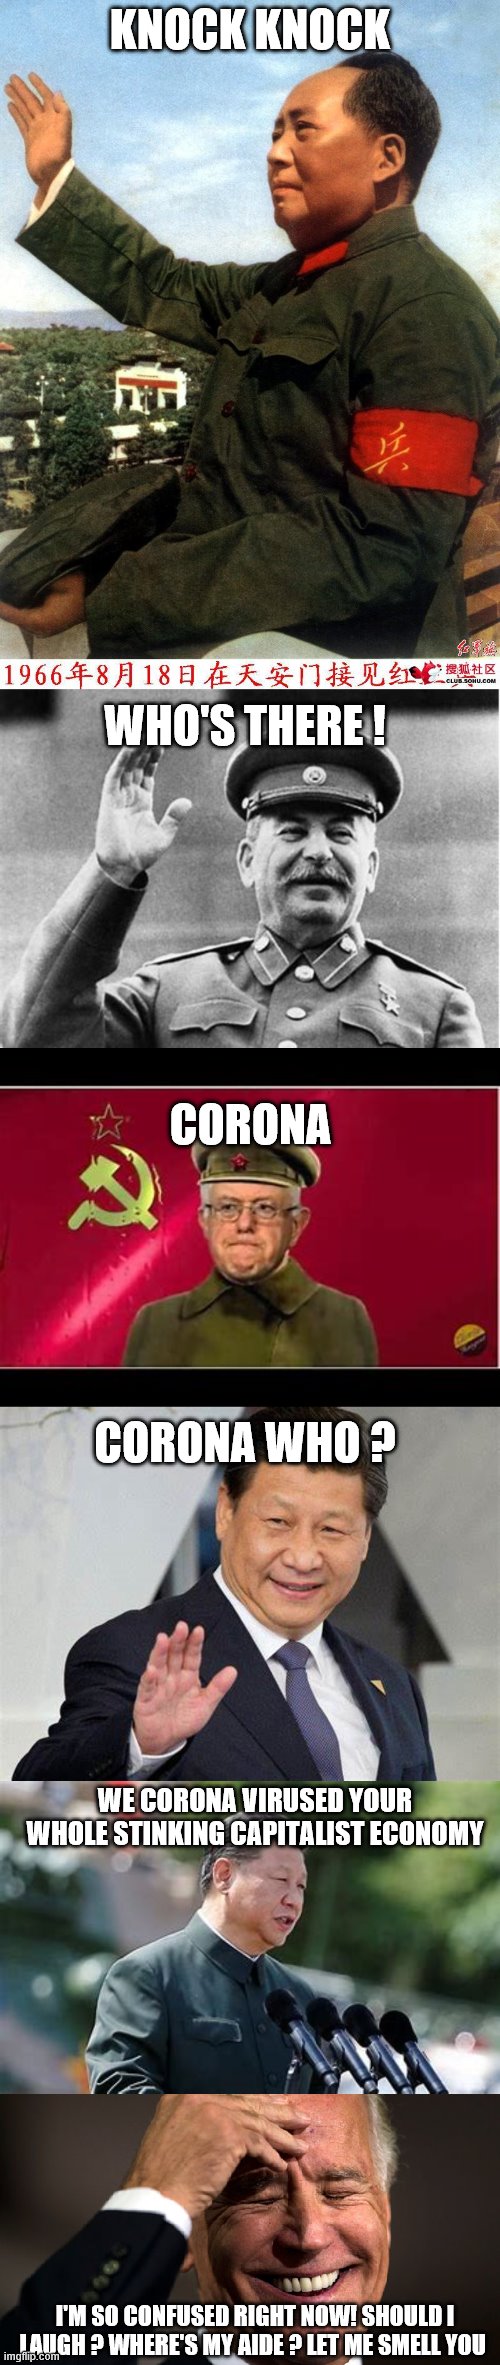 yep | KNOCK KNOCK; WHO'S THERE ! CORONA; CORONA WHO ? WE CORONA VIRUSED YOUR WHOLE STINKING CAPITALIST ECONOMY; I'M SO CONFUSED RIGHT NOW! SHOULD I LAUGH ? WHERE'S MY AIDE ? LET ME SMELL YOU | image tagged in china,joe biden,coronavirus,bernie sanders | made w/ Imgflip meme maker